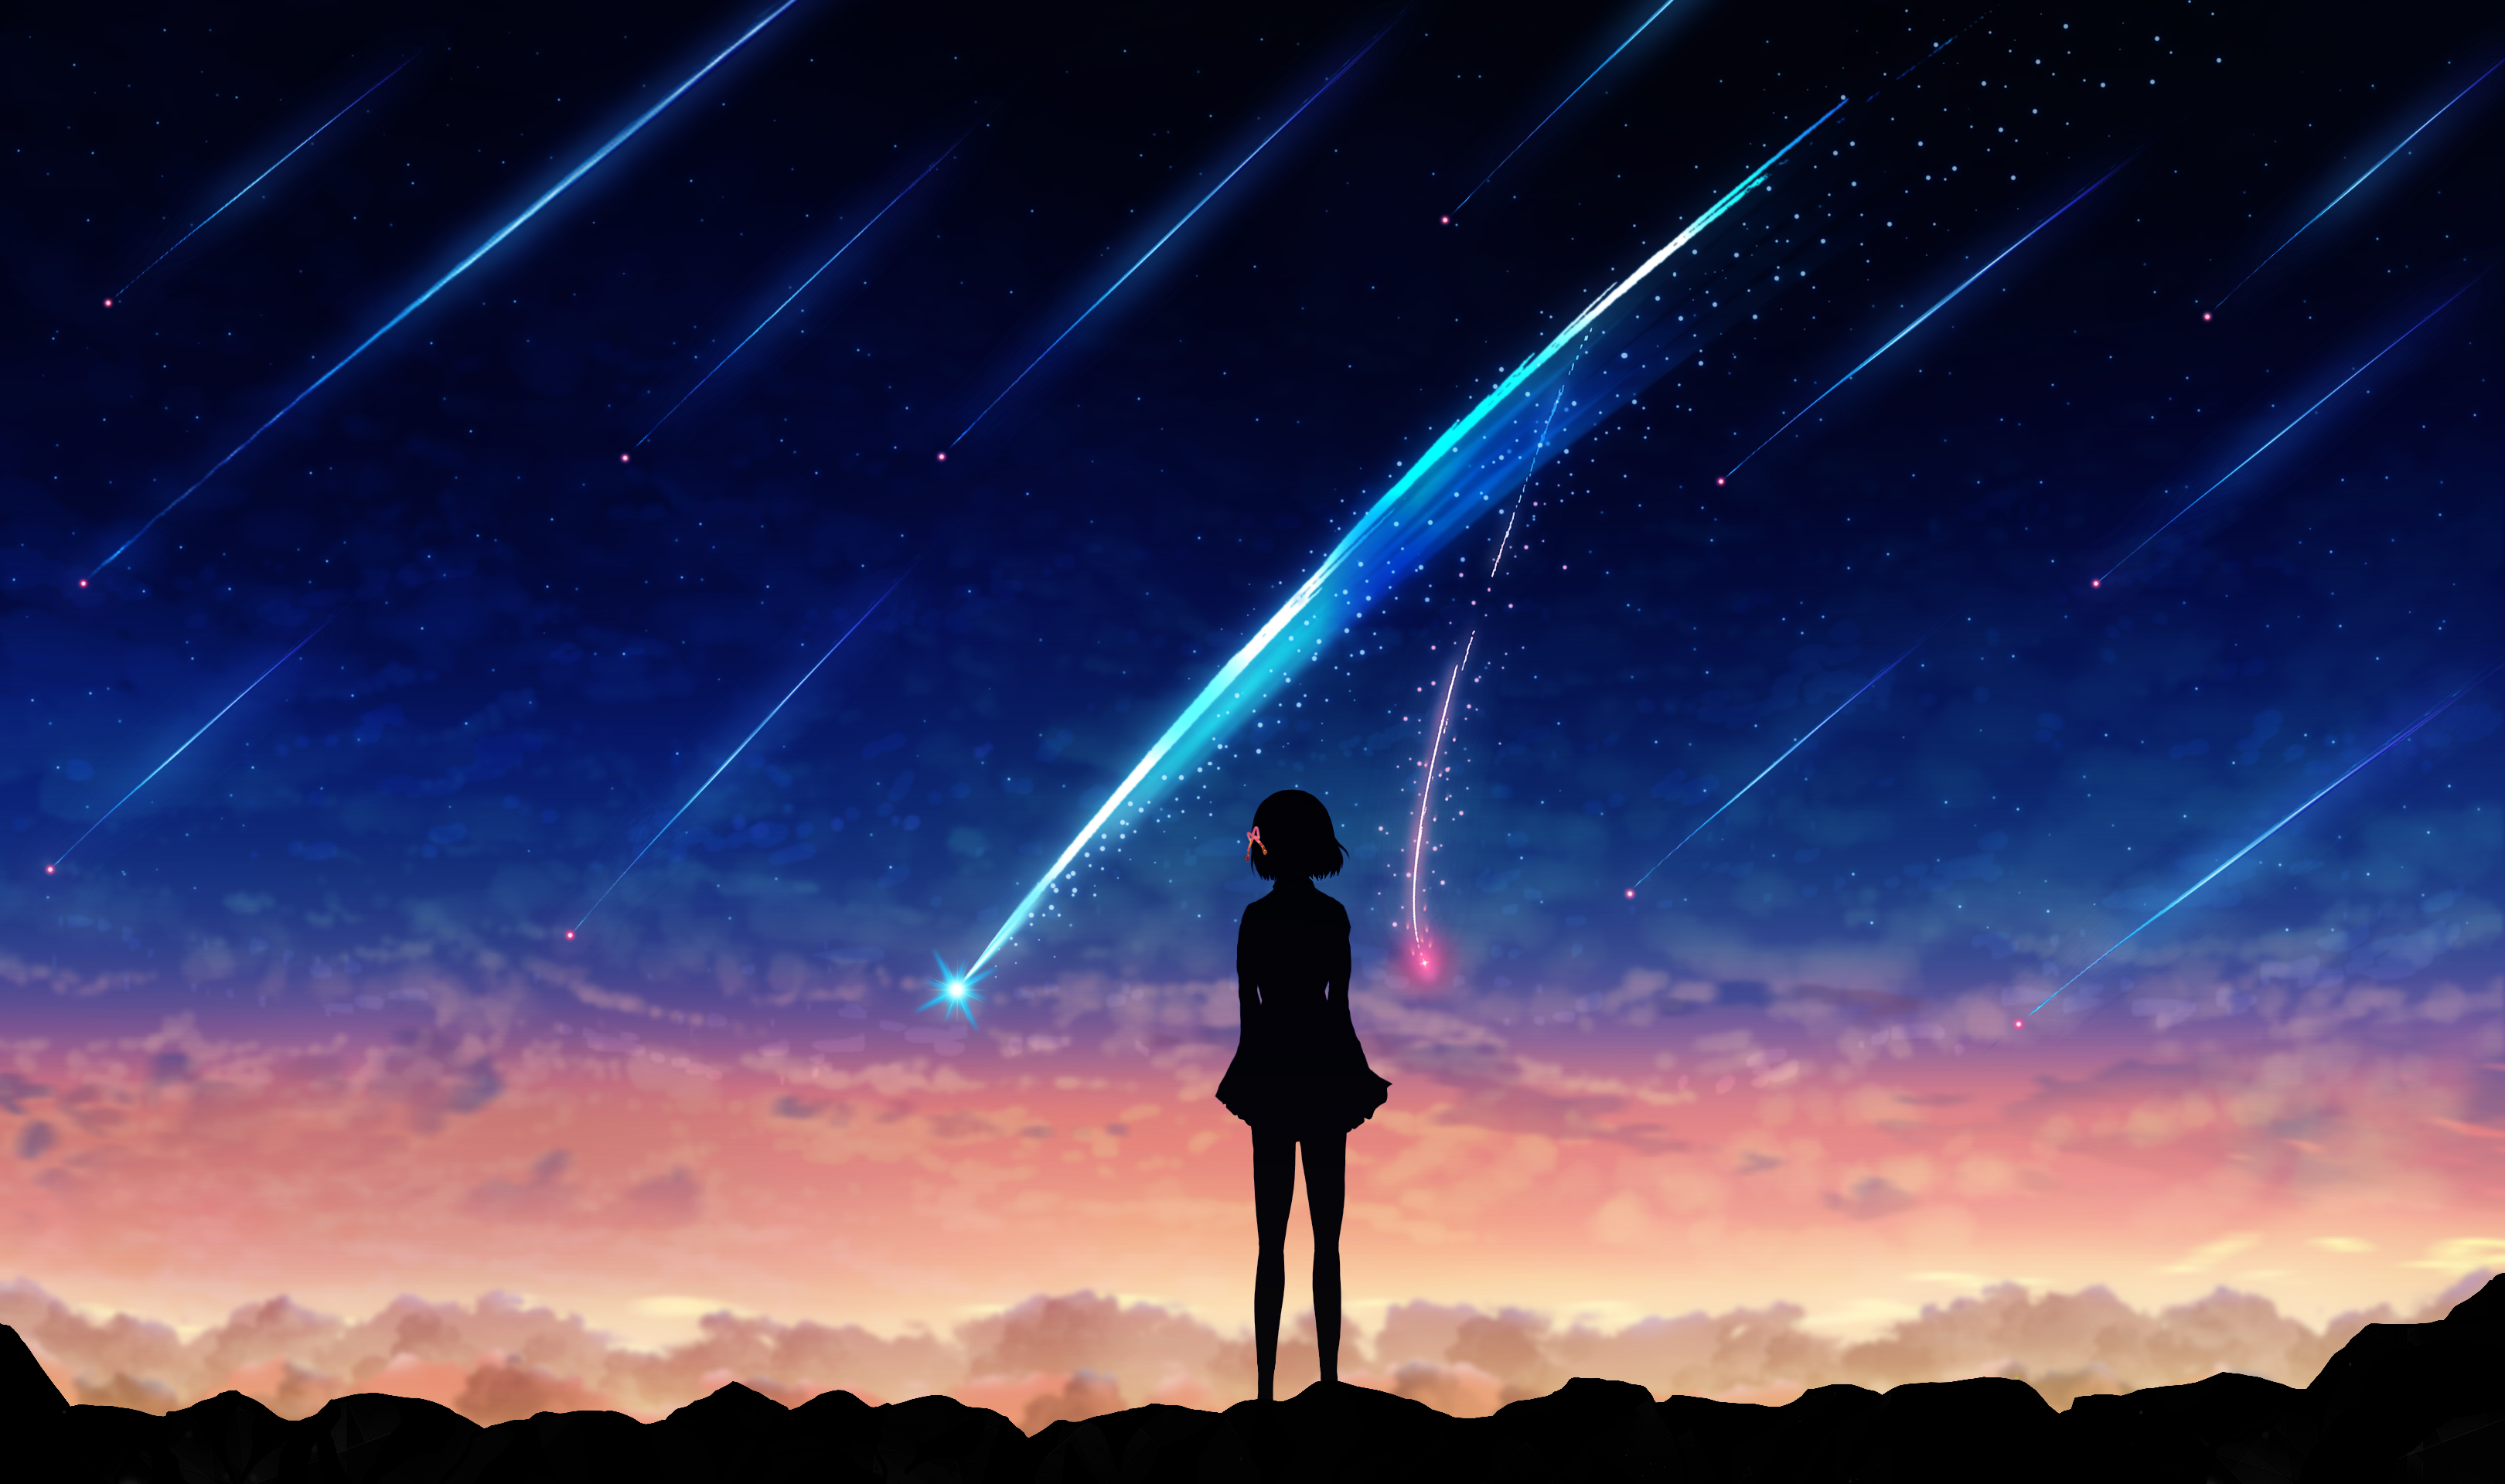  Your  Name  HD  Wallpaper  Background  Image 3240x1920 